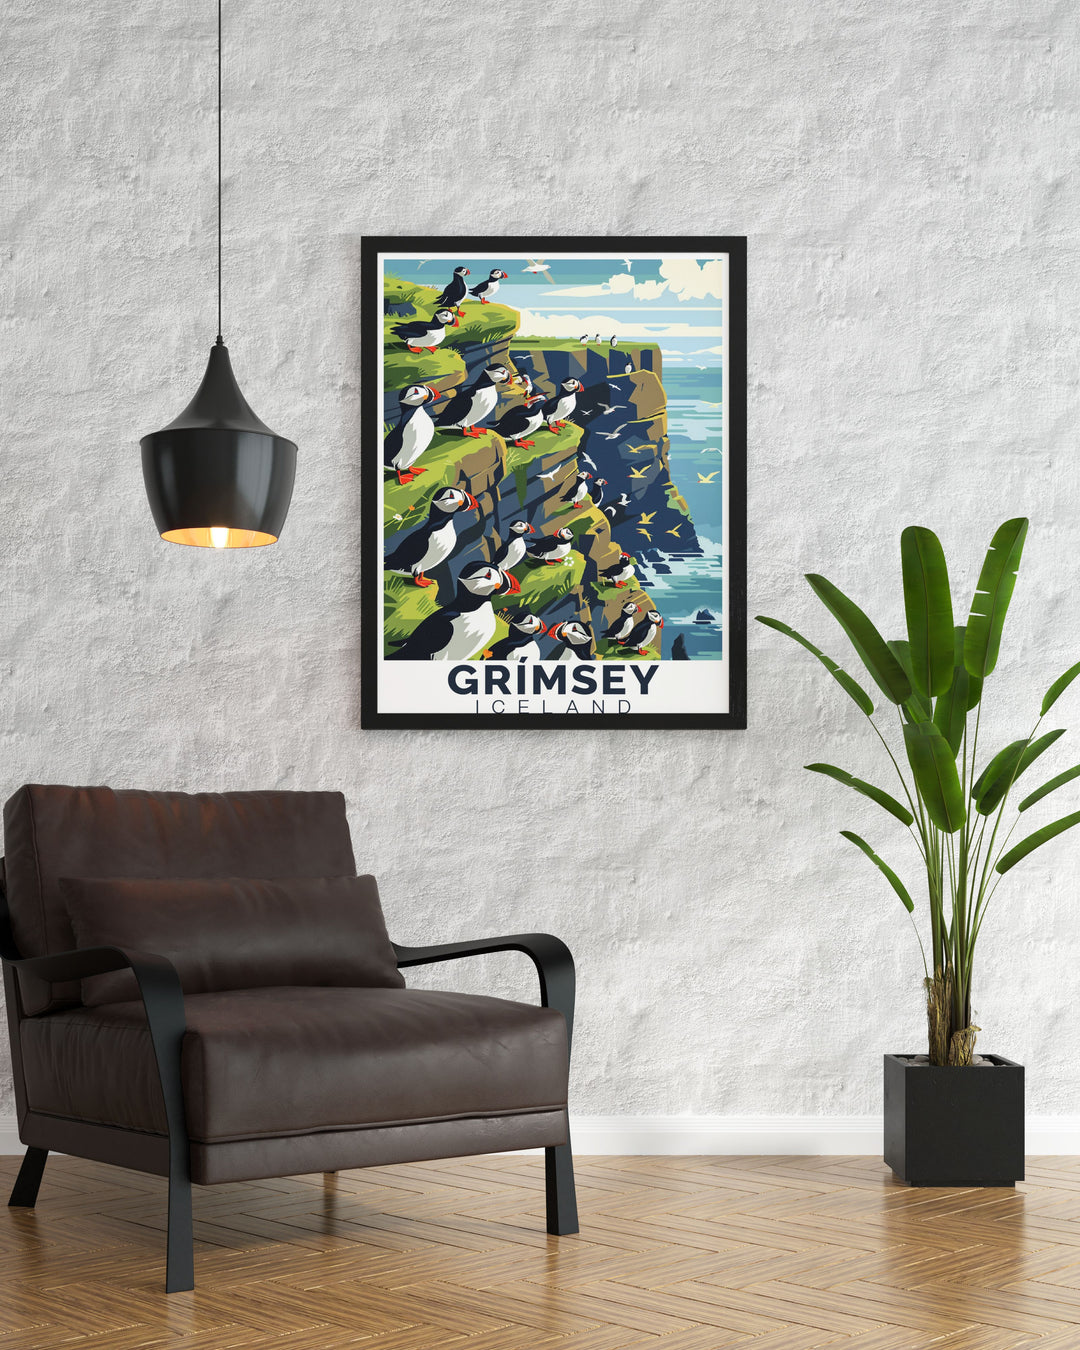 Showcasing the stunning Northern Lights over Grimsey Island, this art print brings the magical beauty of the Aurora Borealis into your living space, ideal for creating a serene atmosphere.